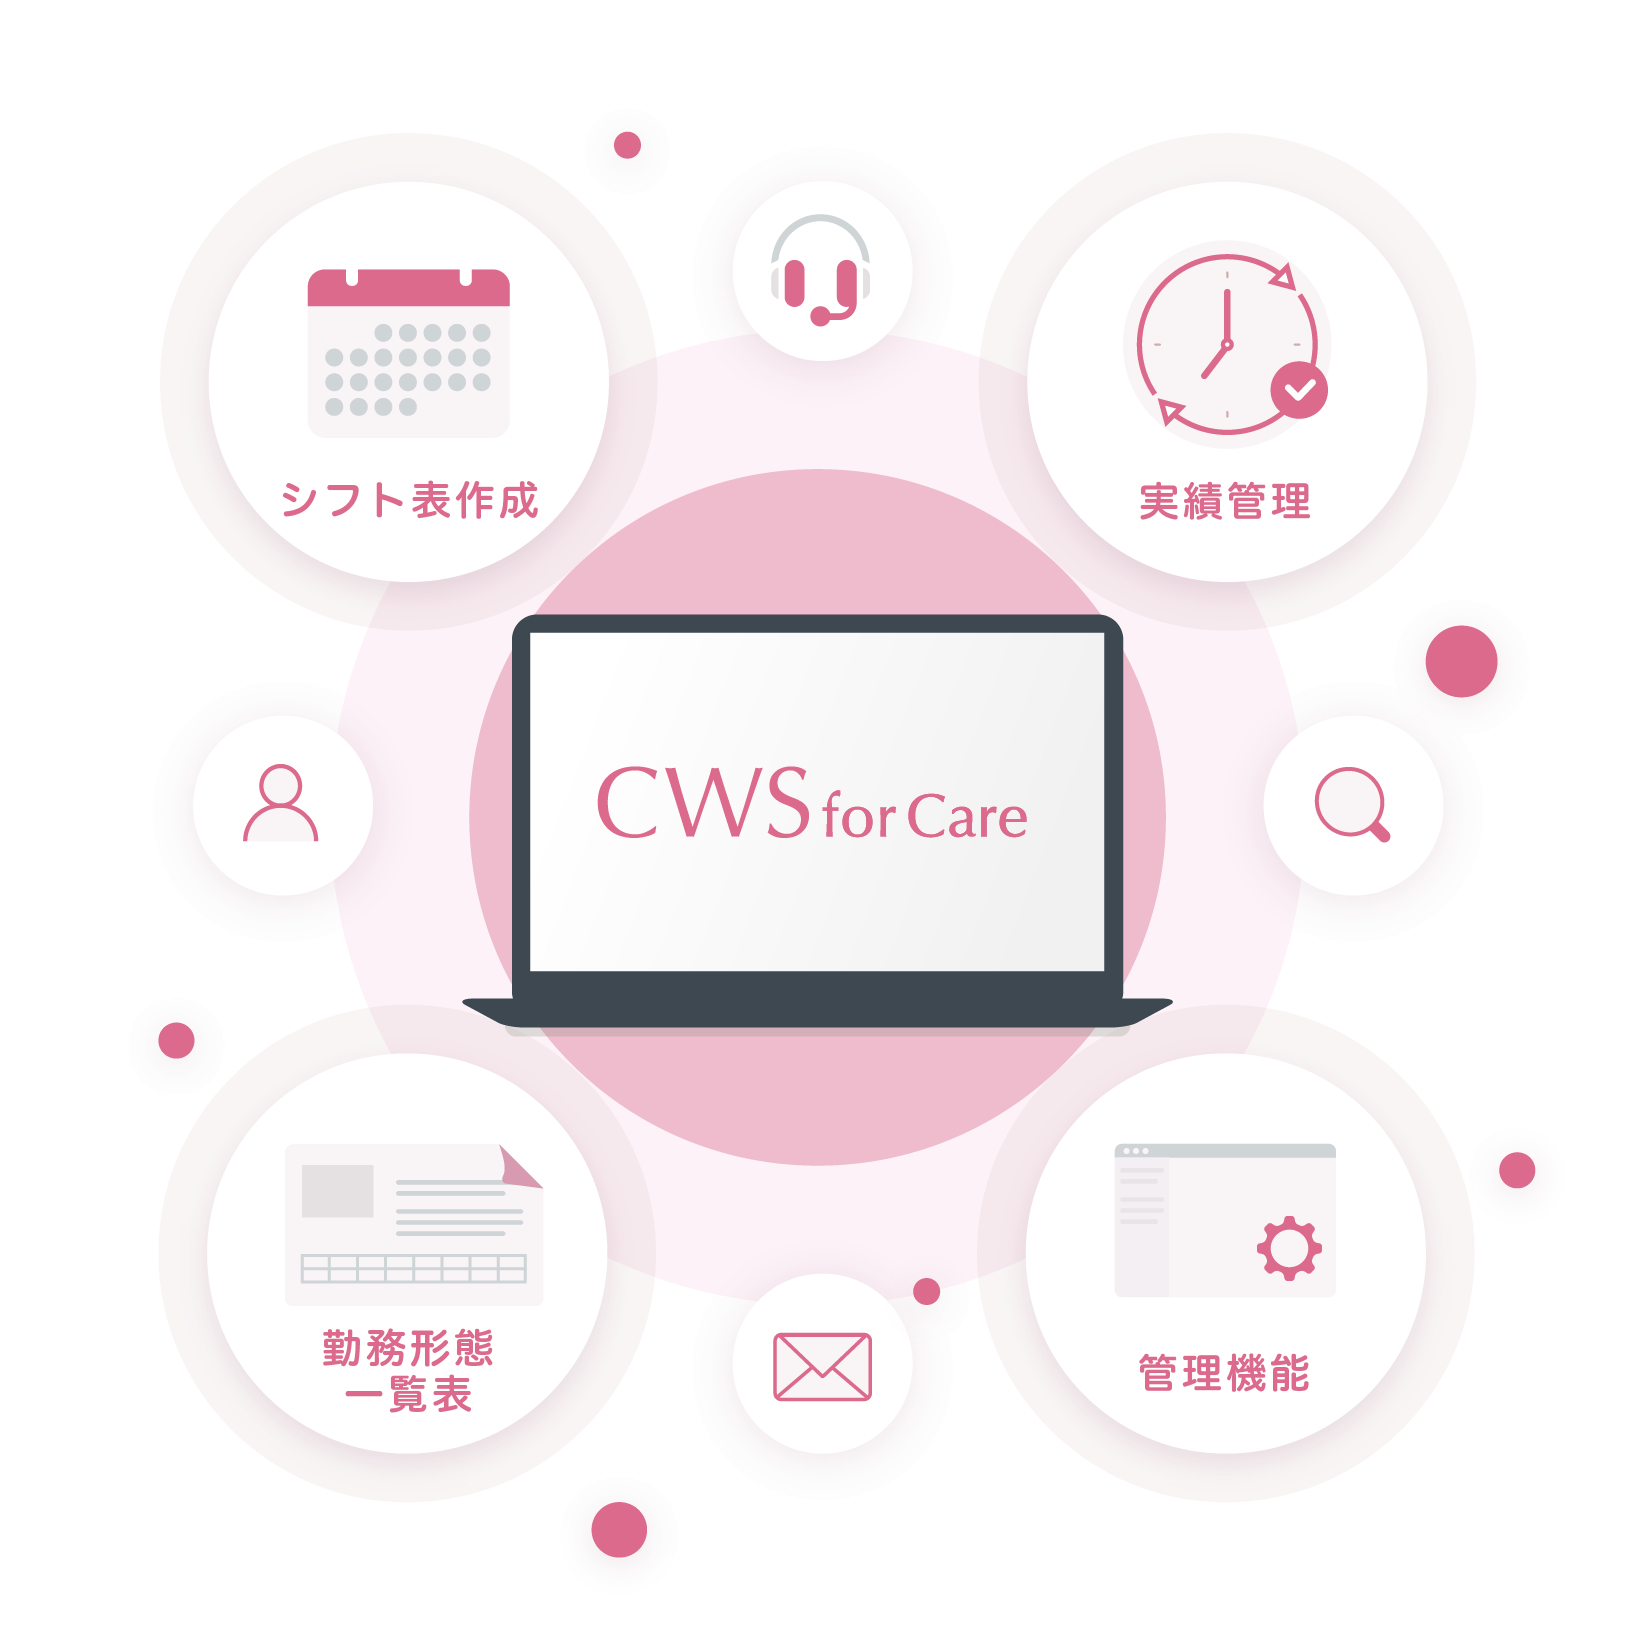 CWS for Careとは